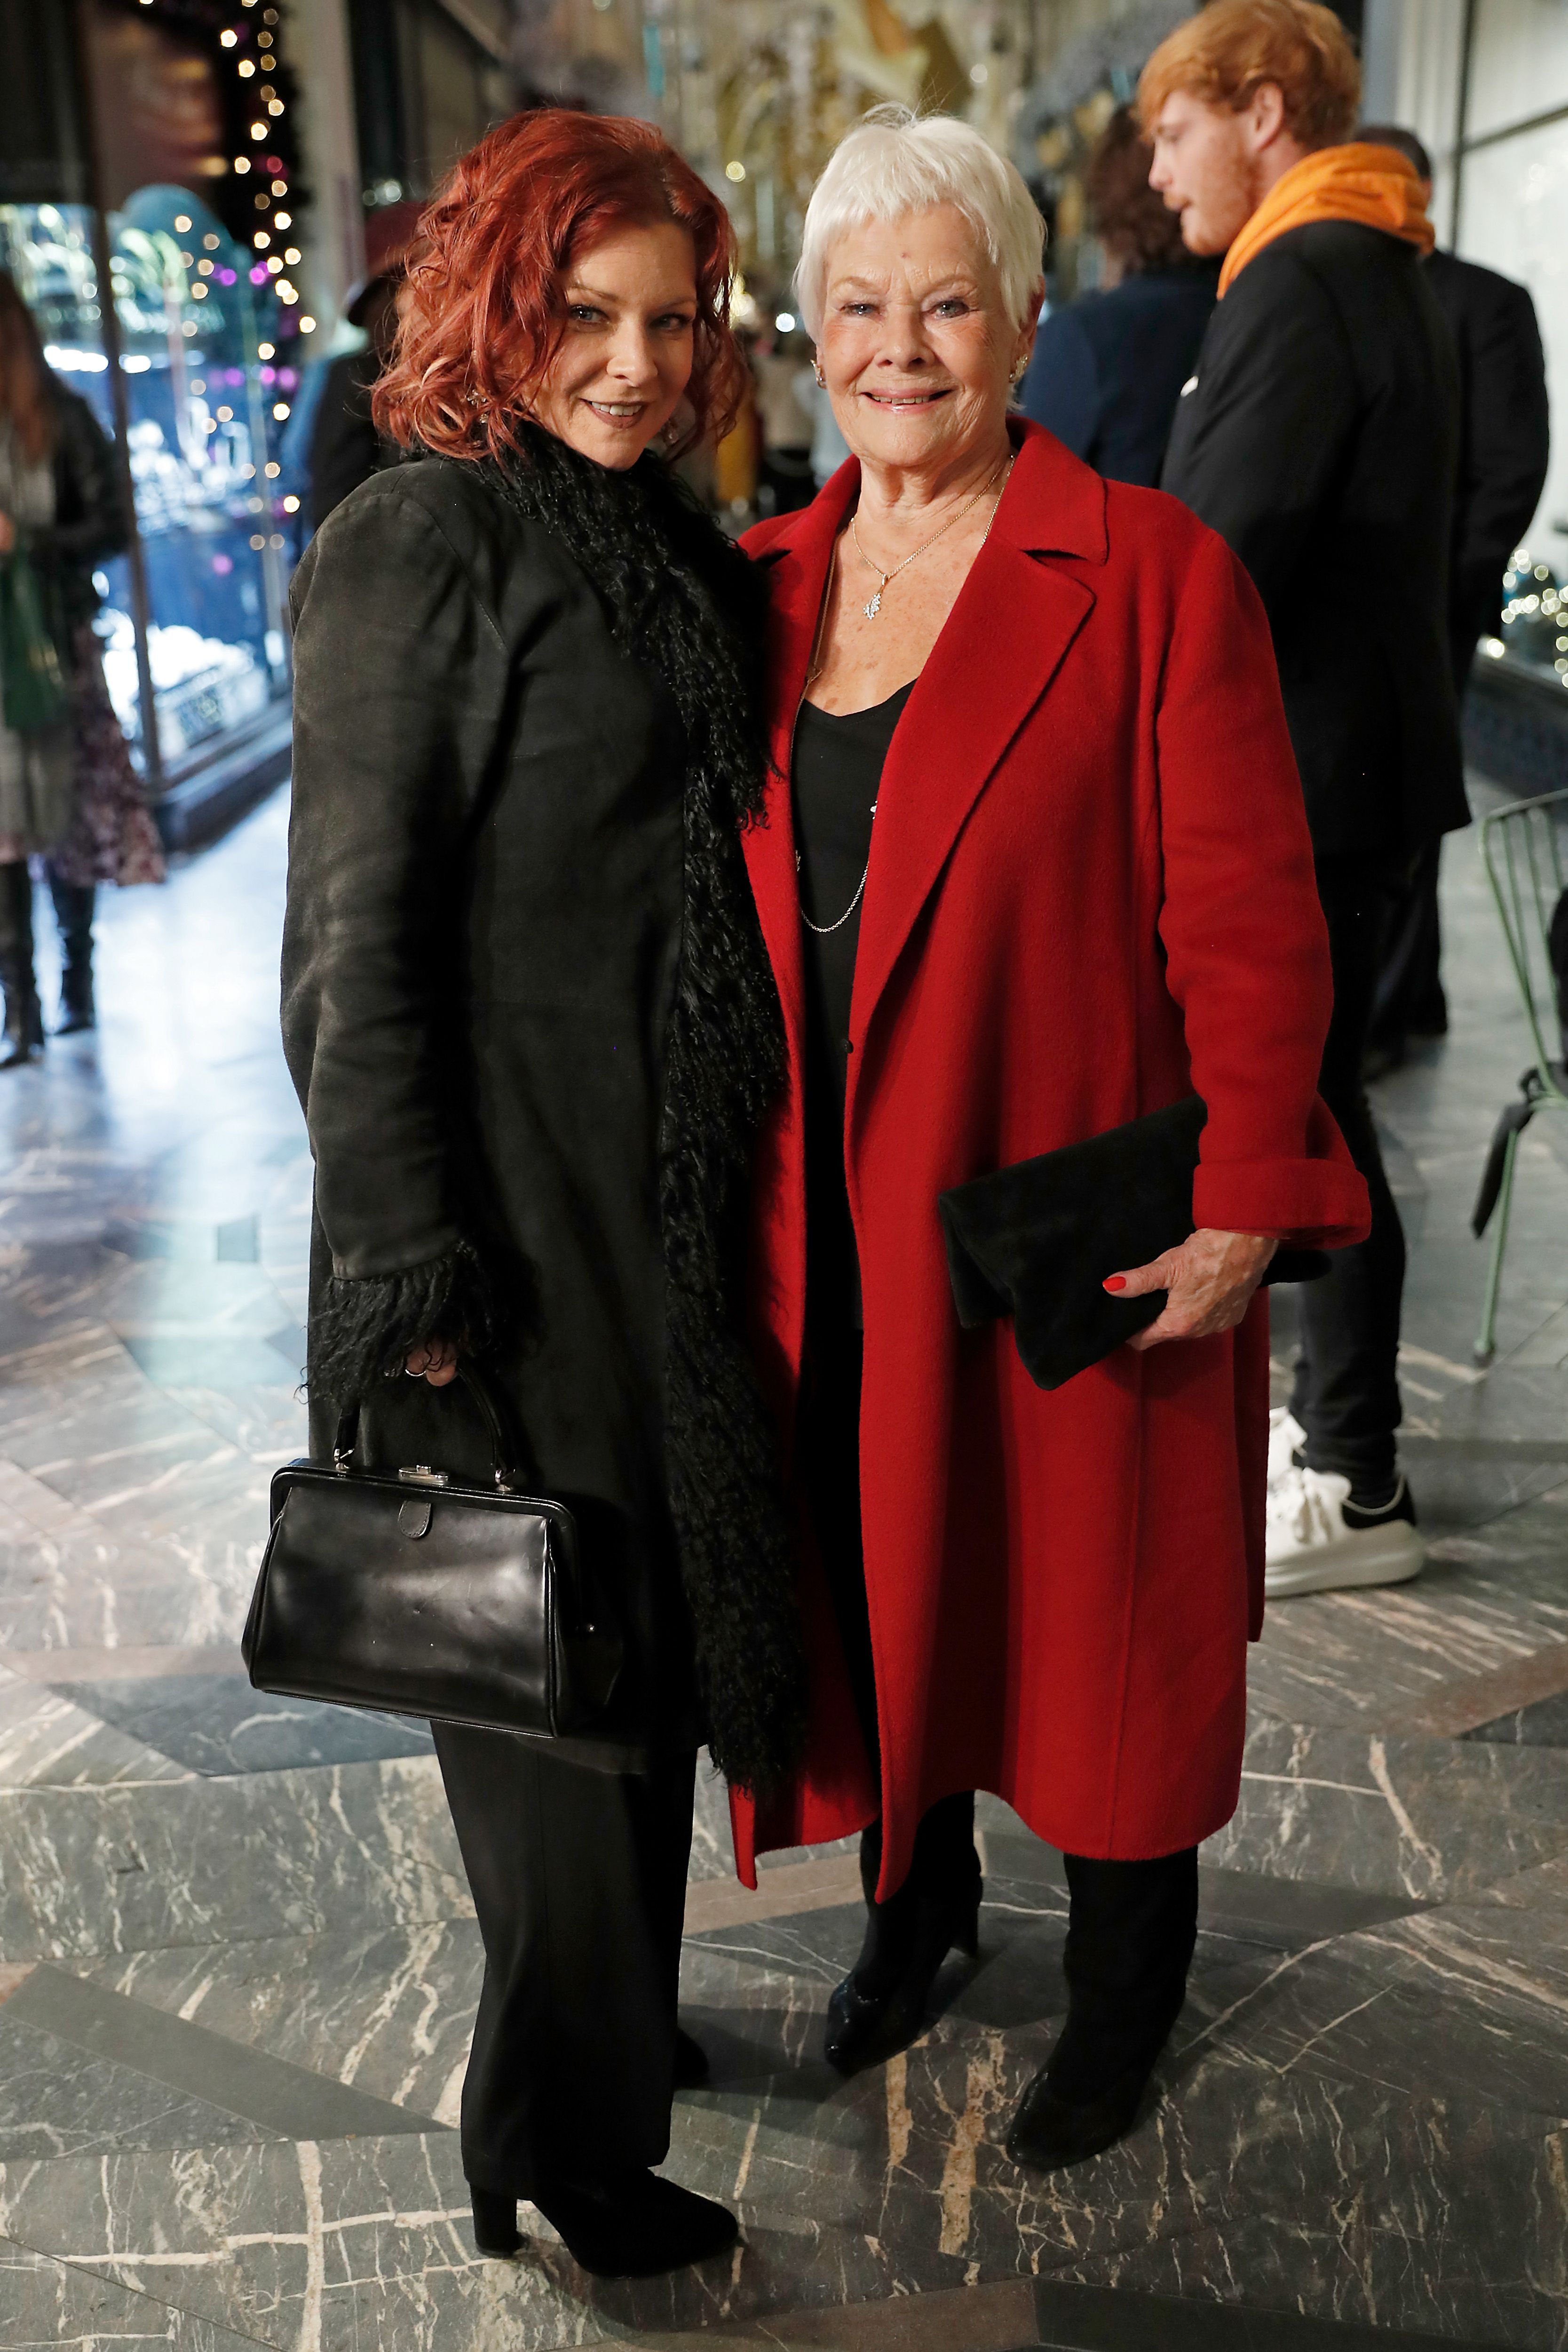 Judi Dench and her daughter, actress Finty Williams, at the event celebrating the 200th Burlington Christmas in 2019 in London, England | Photo]: Getty Images